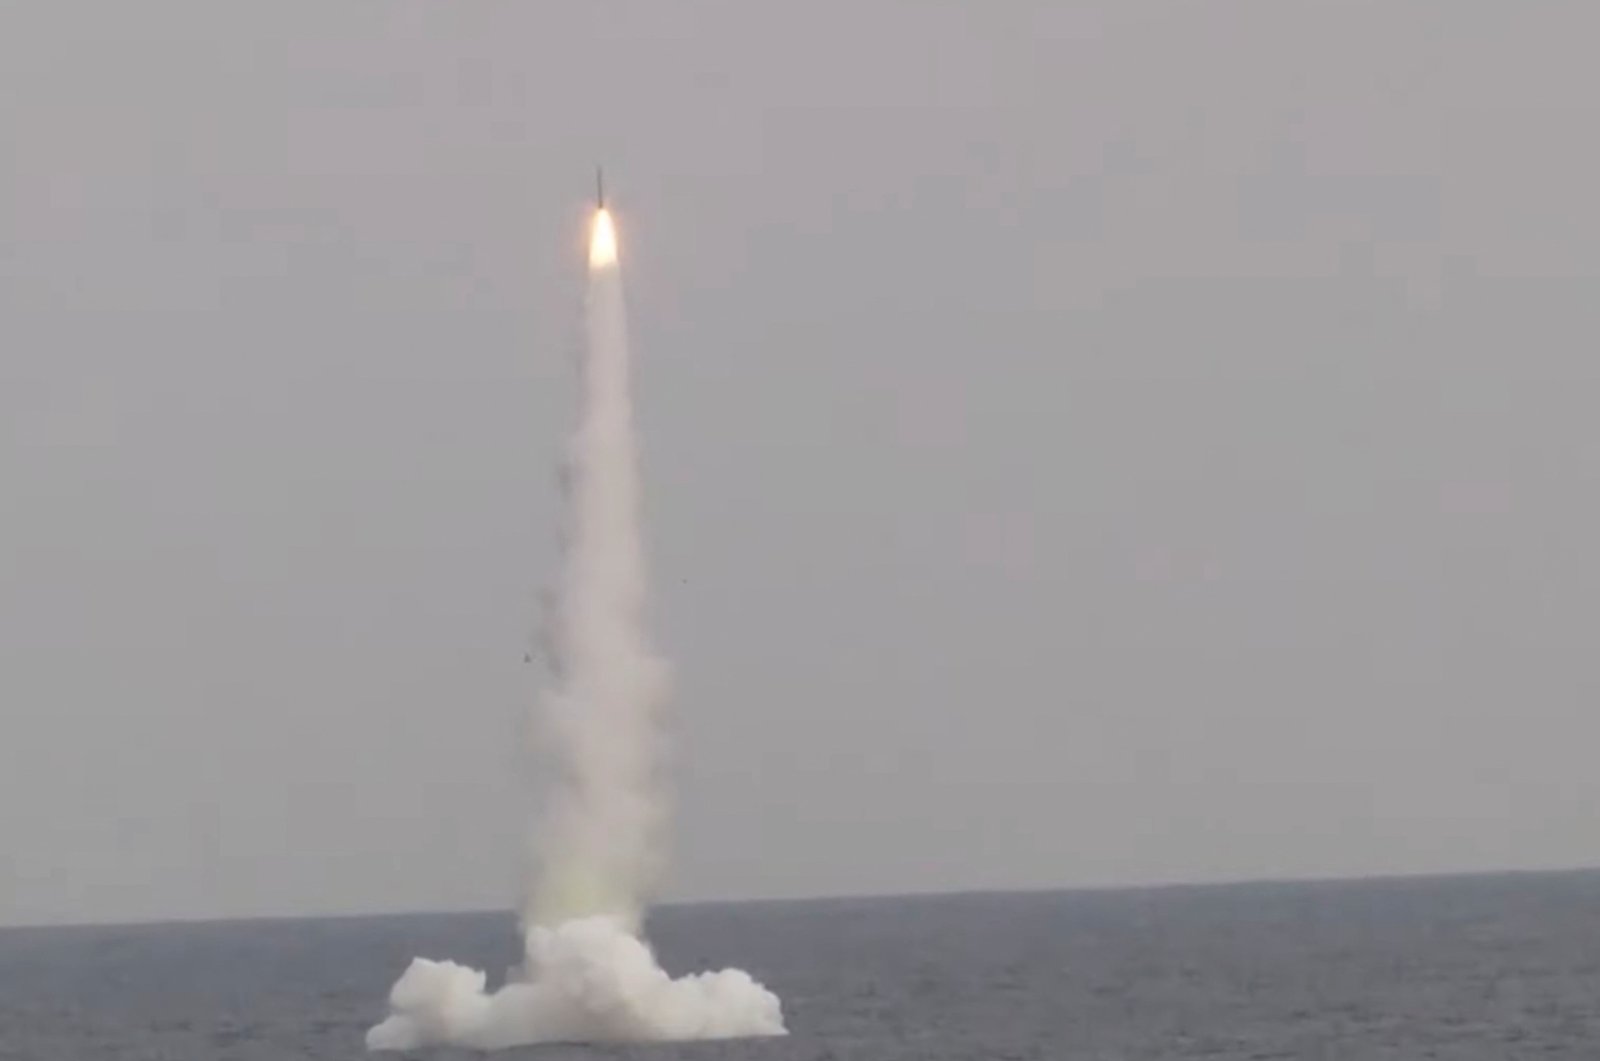 A Kalibr cruise missile is launched from Russian submarine Petropavlovsk-Kamchatsky of the Pacific Fleet during a test in the waters of the Sea of Japan, Dec. 21, 2021. (Russian Defence Ministry vie Reuters)